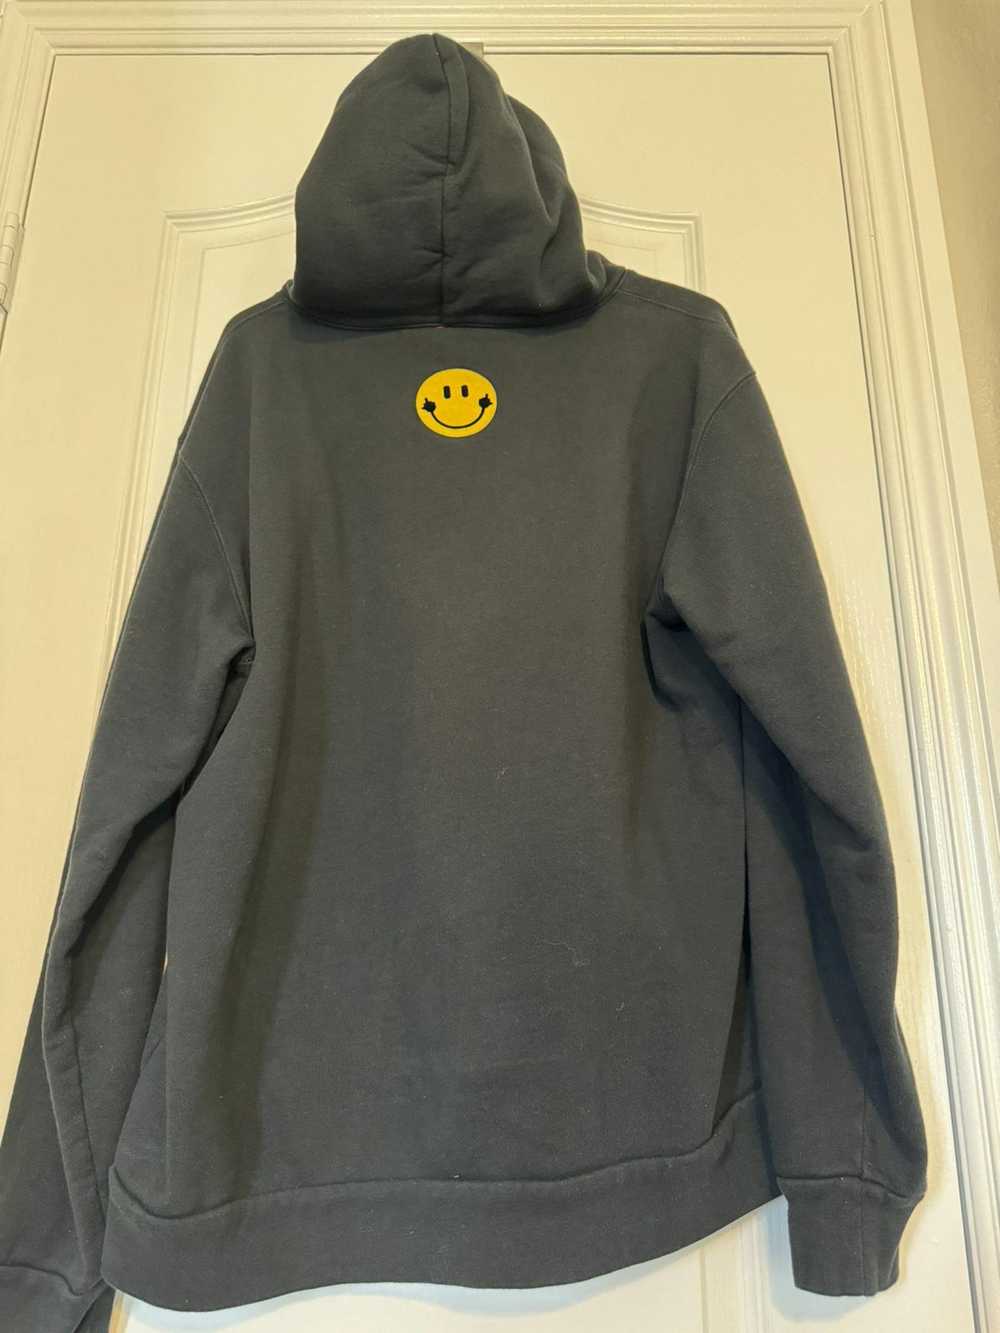 Vintage TODAY’S RIOT SMILEY HOODIE - image 2